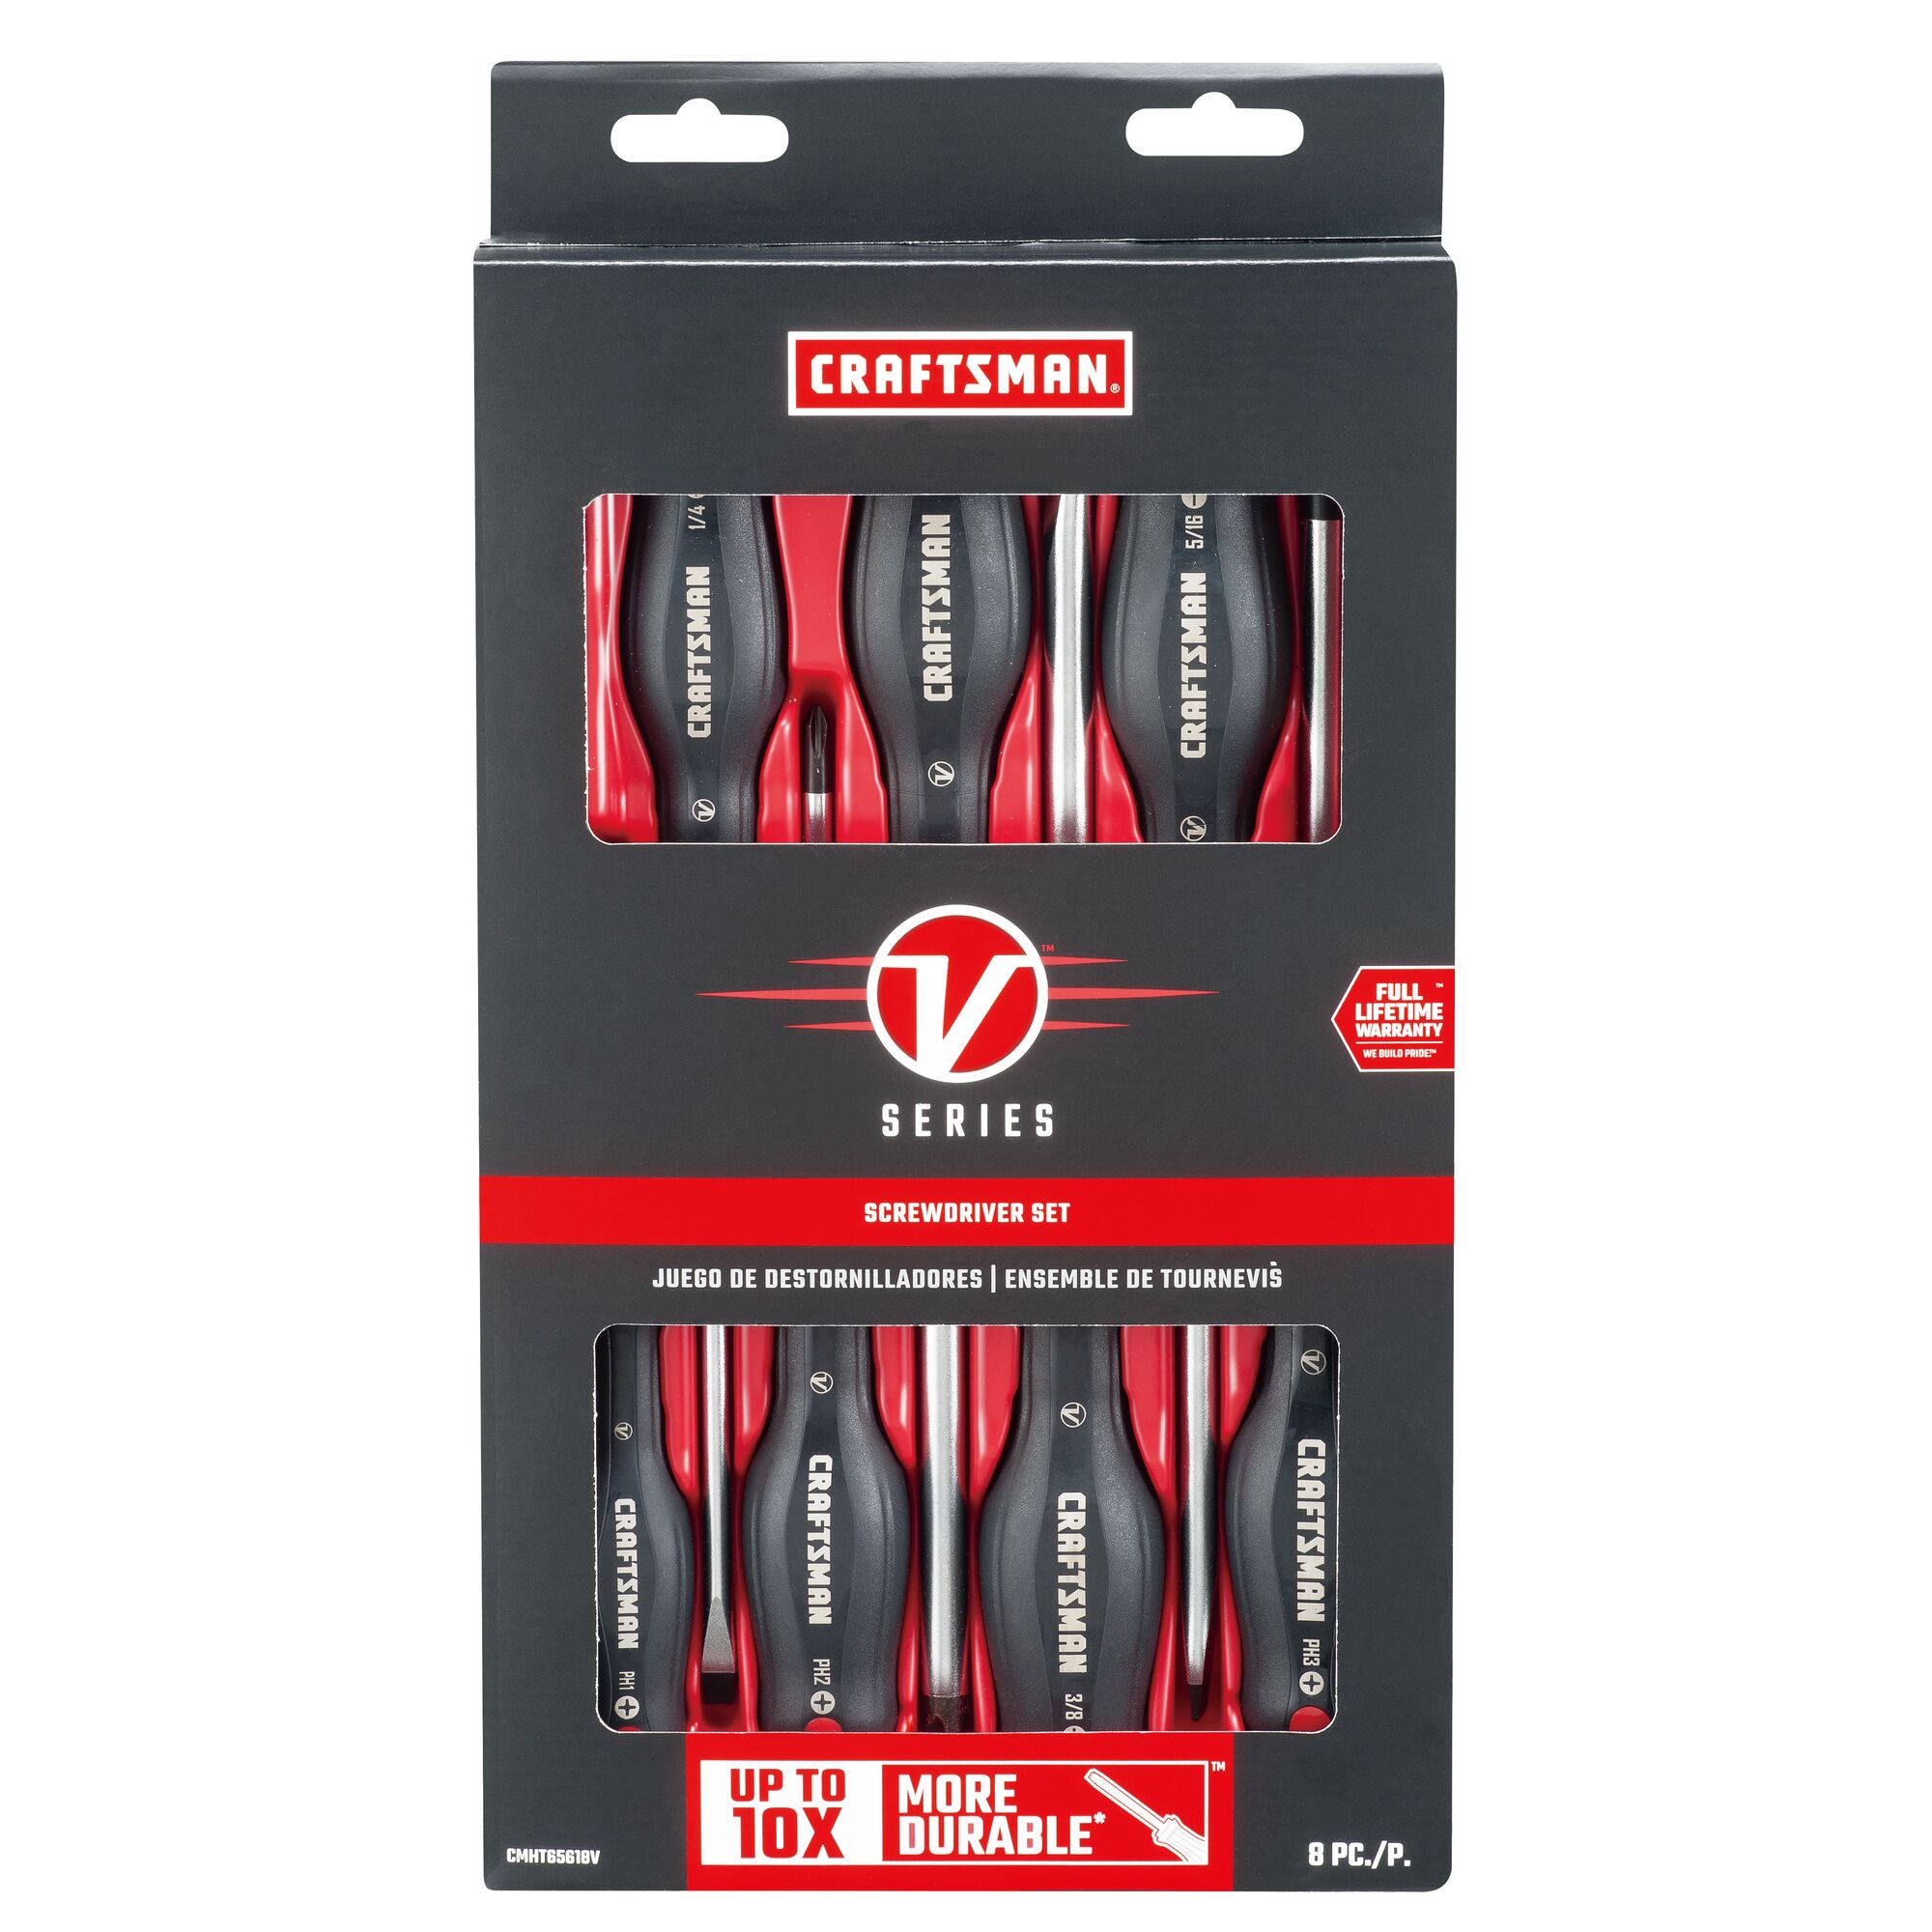 V Series 8 piece ScrewDriver Set in card box packaging.